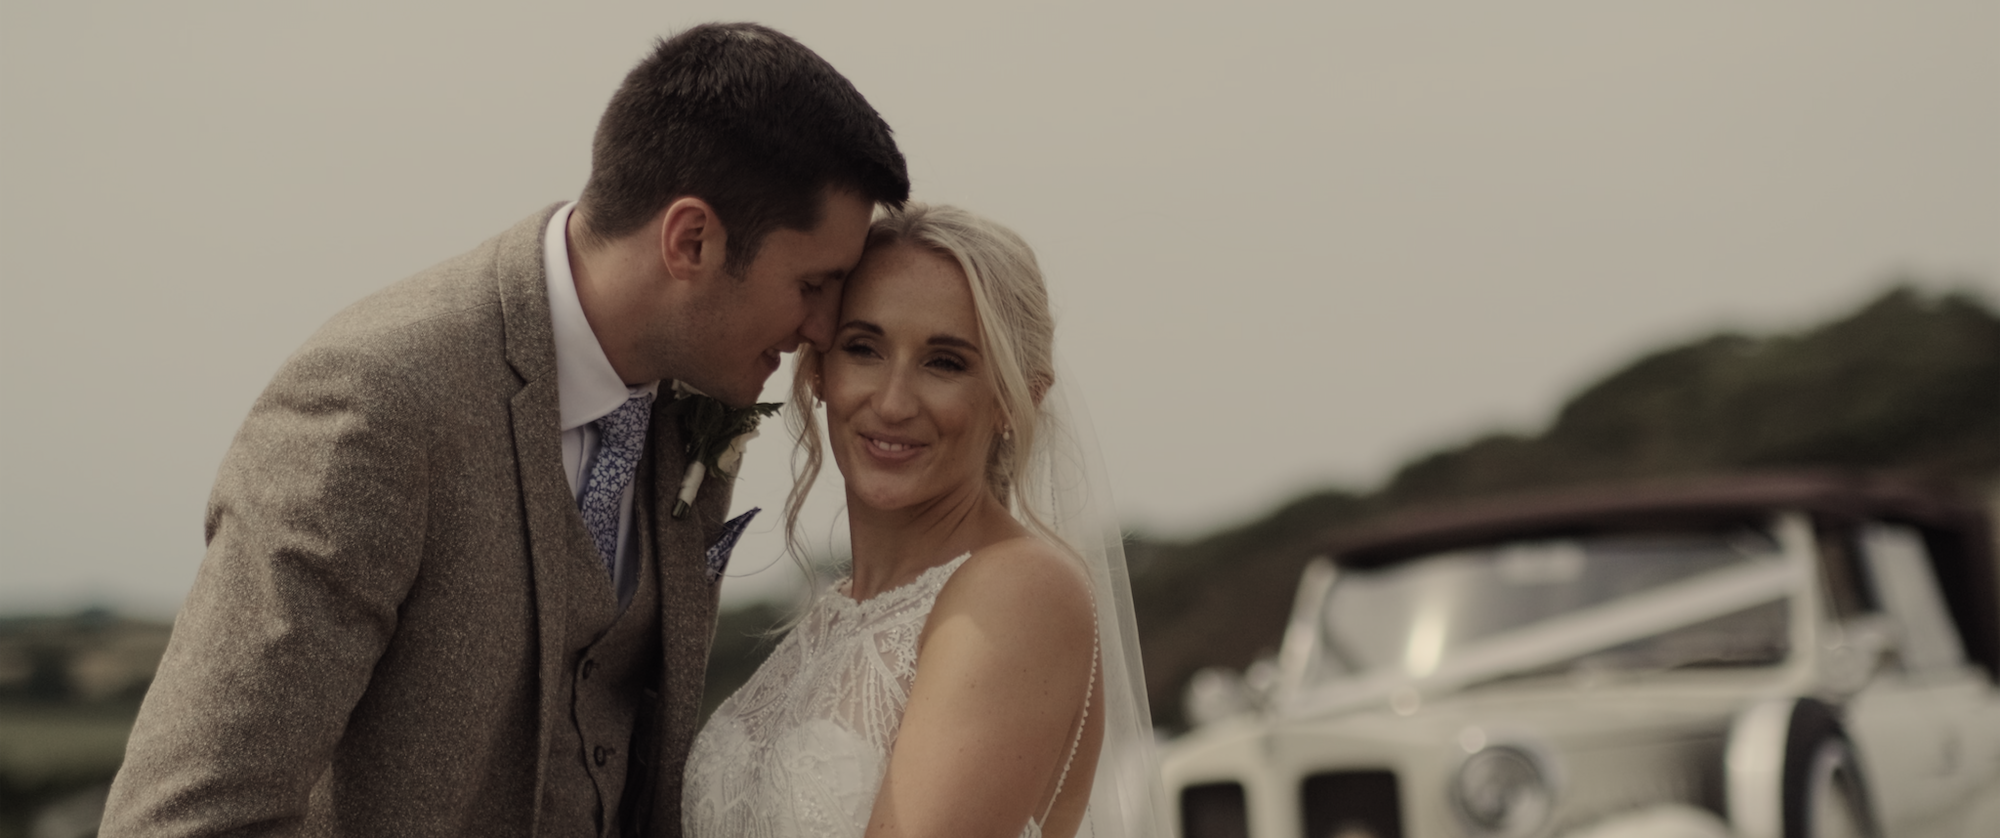 Oxwich Bay Hotel Wedding Videography by Ben Holbrook Films (Swansea South Wales).jpeg29.png